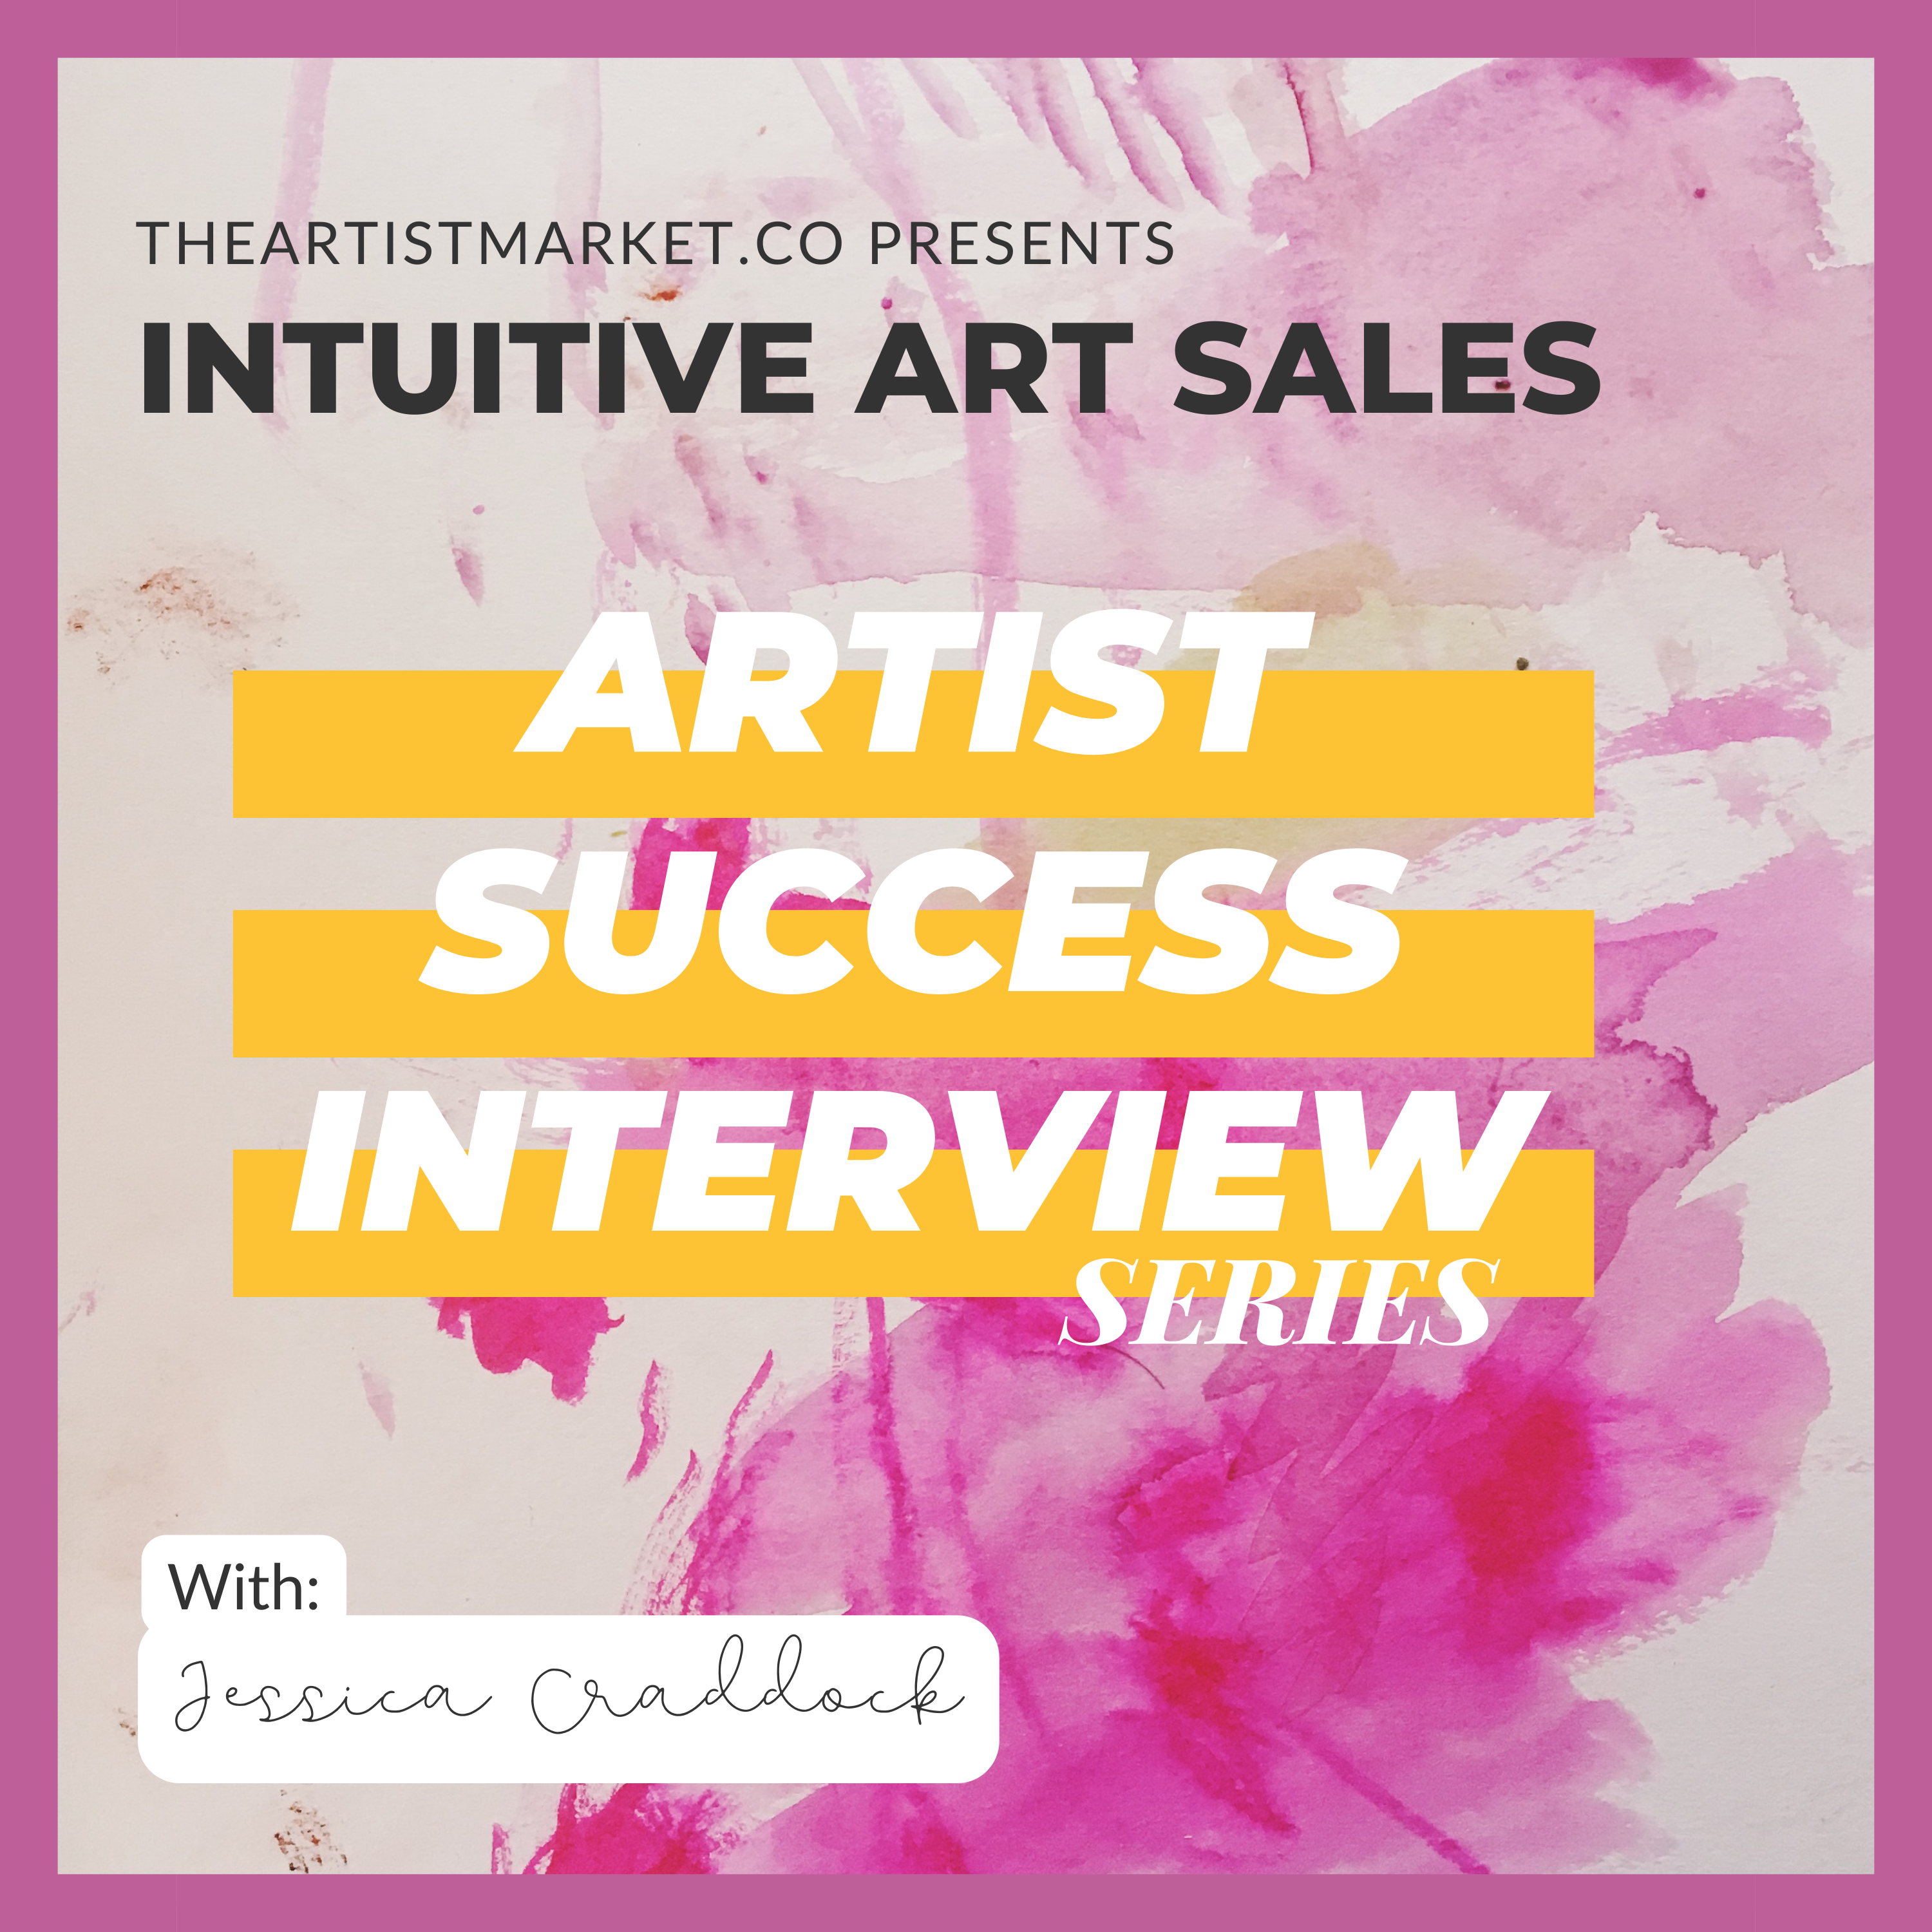 Jess Currier: How commitment and consistency helped Jess Currier 10X her art sales in just one year. - ASIS 4